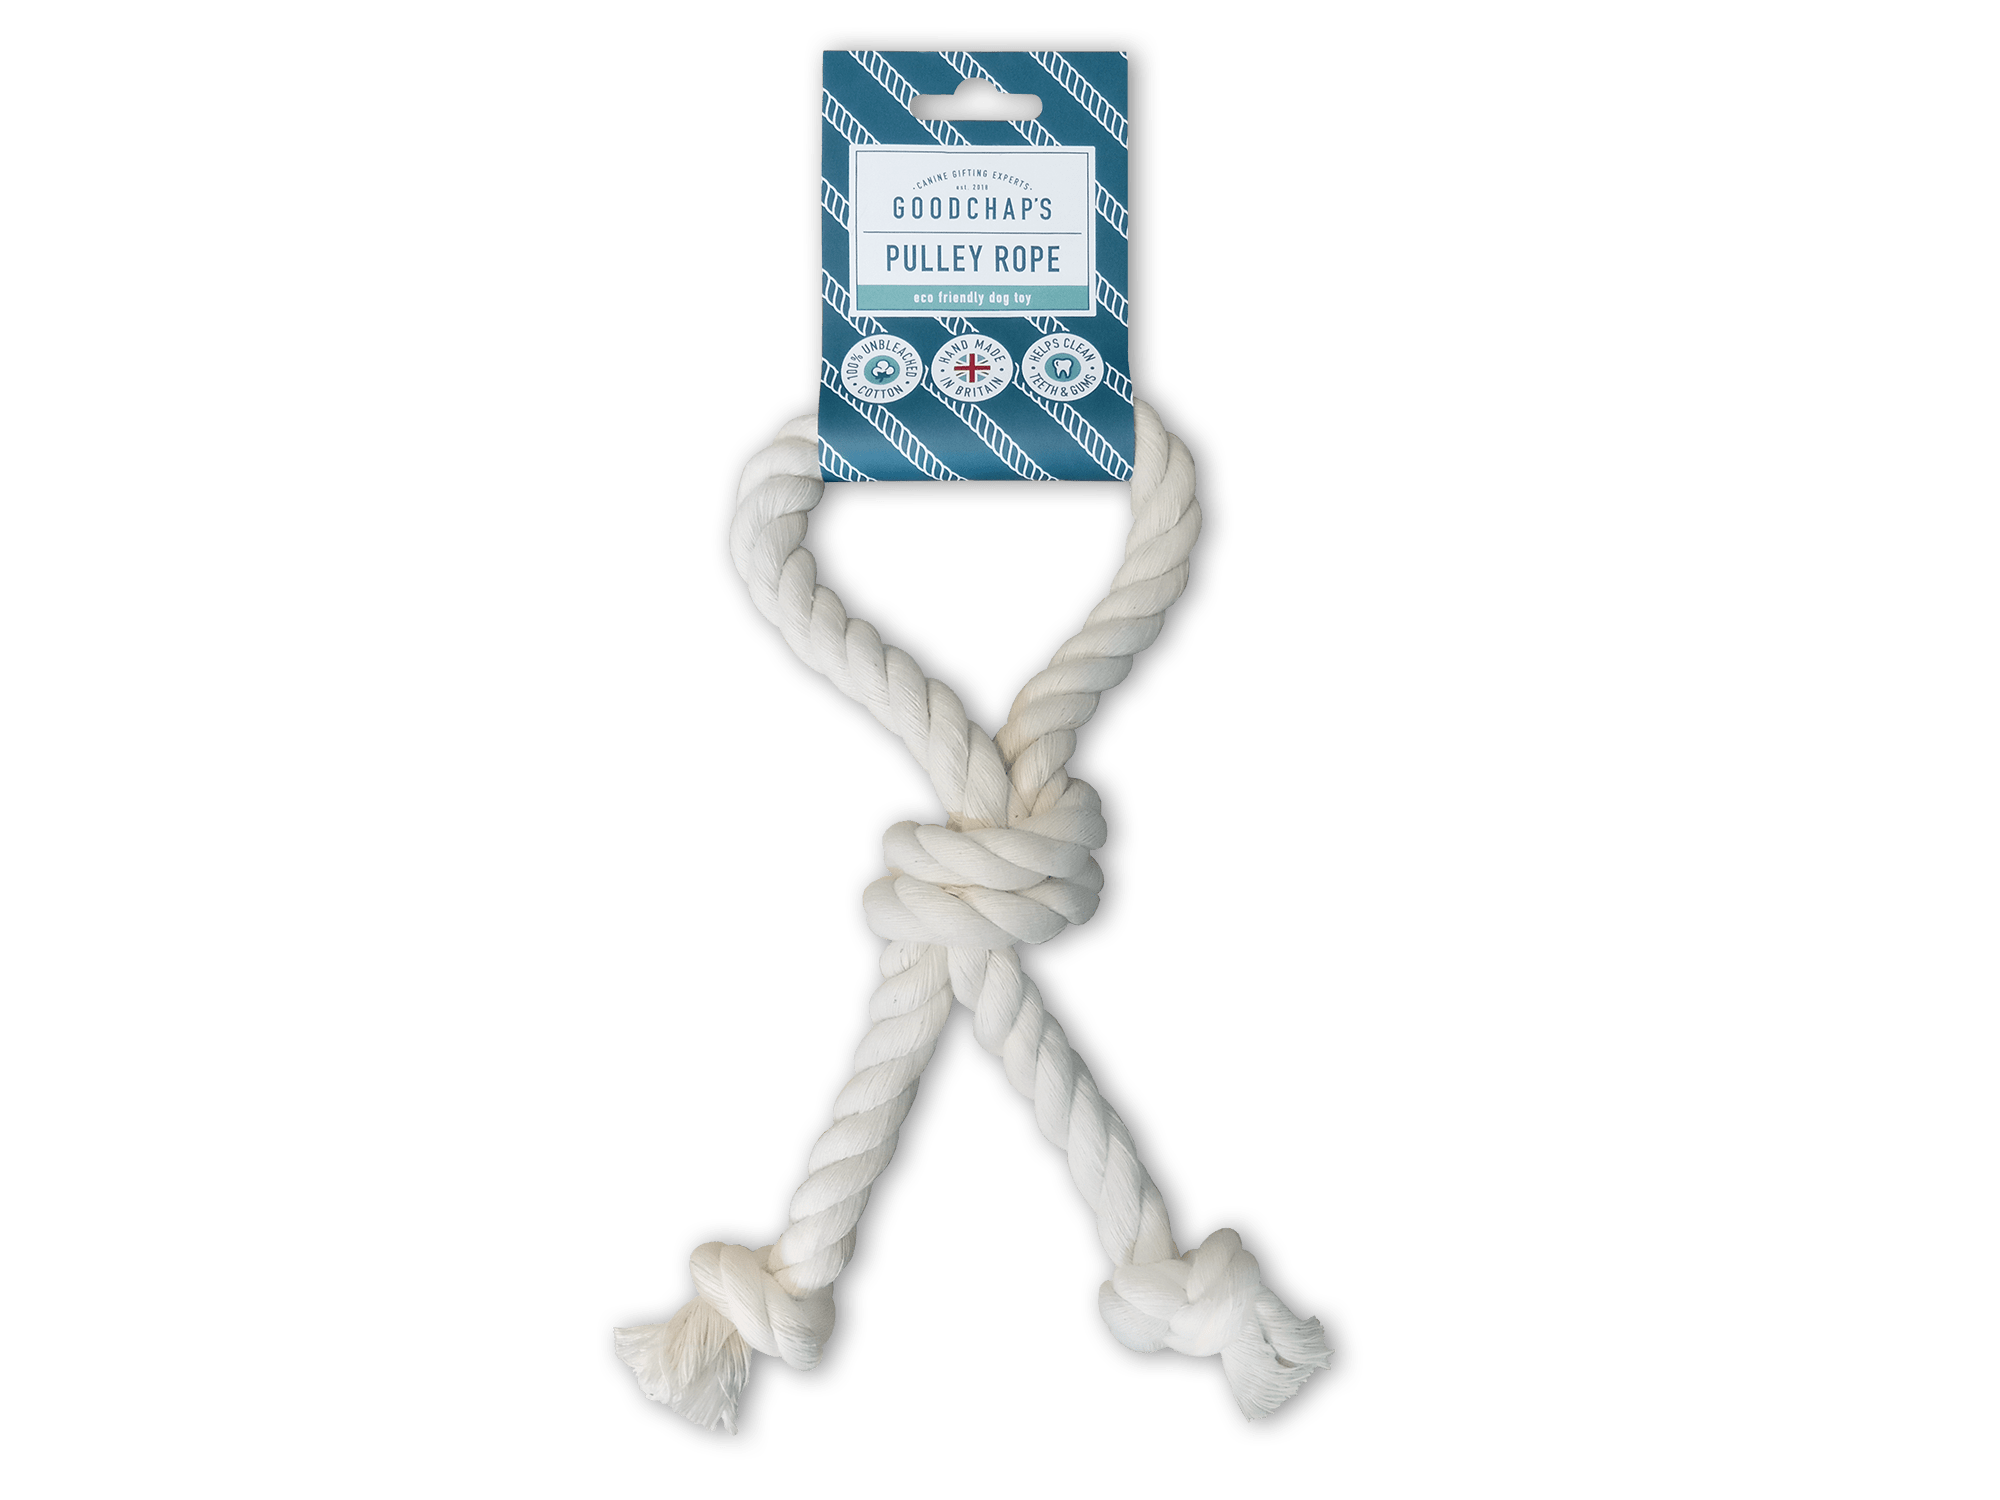 Goodchap's Pulley Rope